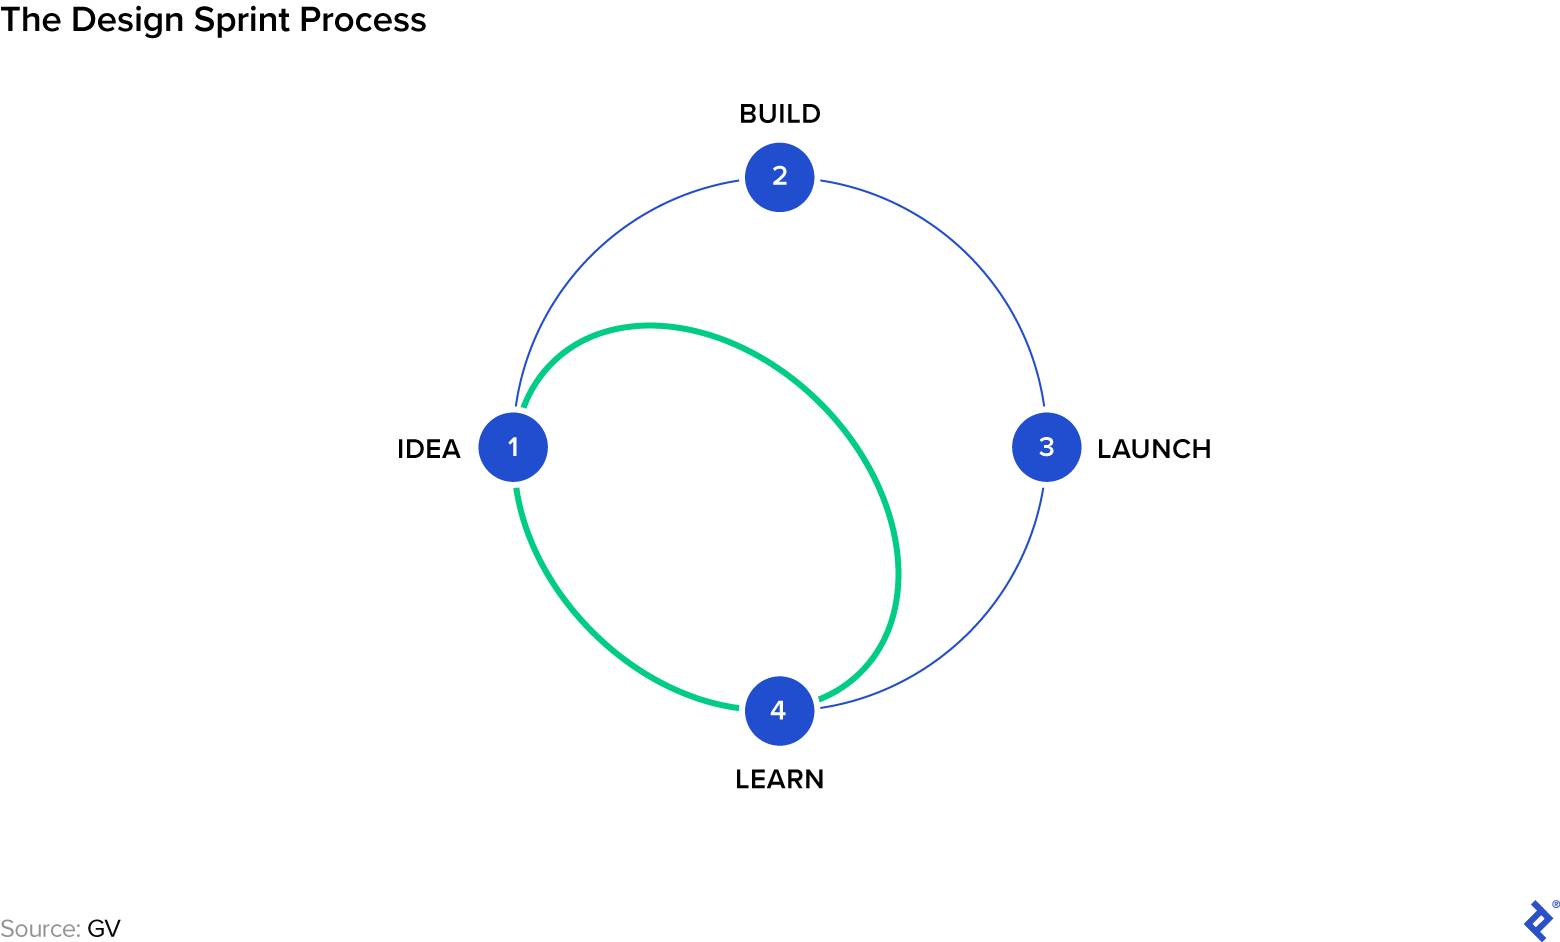 Illustration of the design sprint process as defined by GV. A circle is shown with four numbered points: idea (1), build (2), launch (3), and learn (4). An extra line is shown connecting points 1 and 4, representing a shortcut between idea and learn.